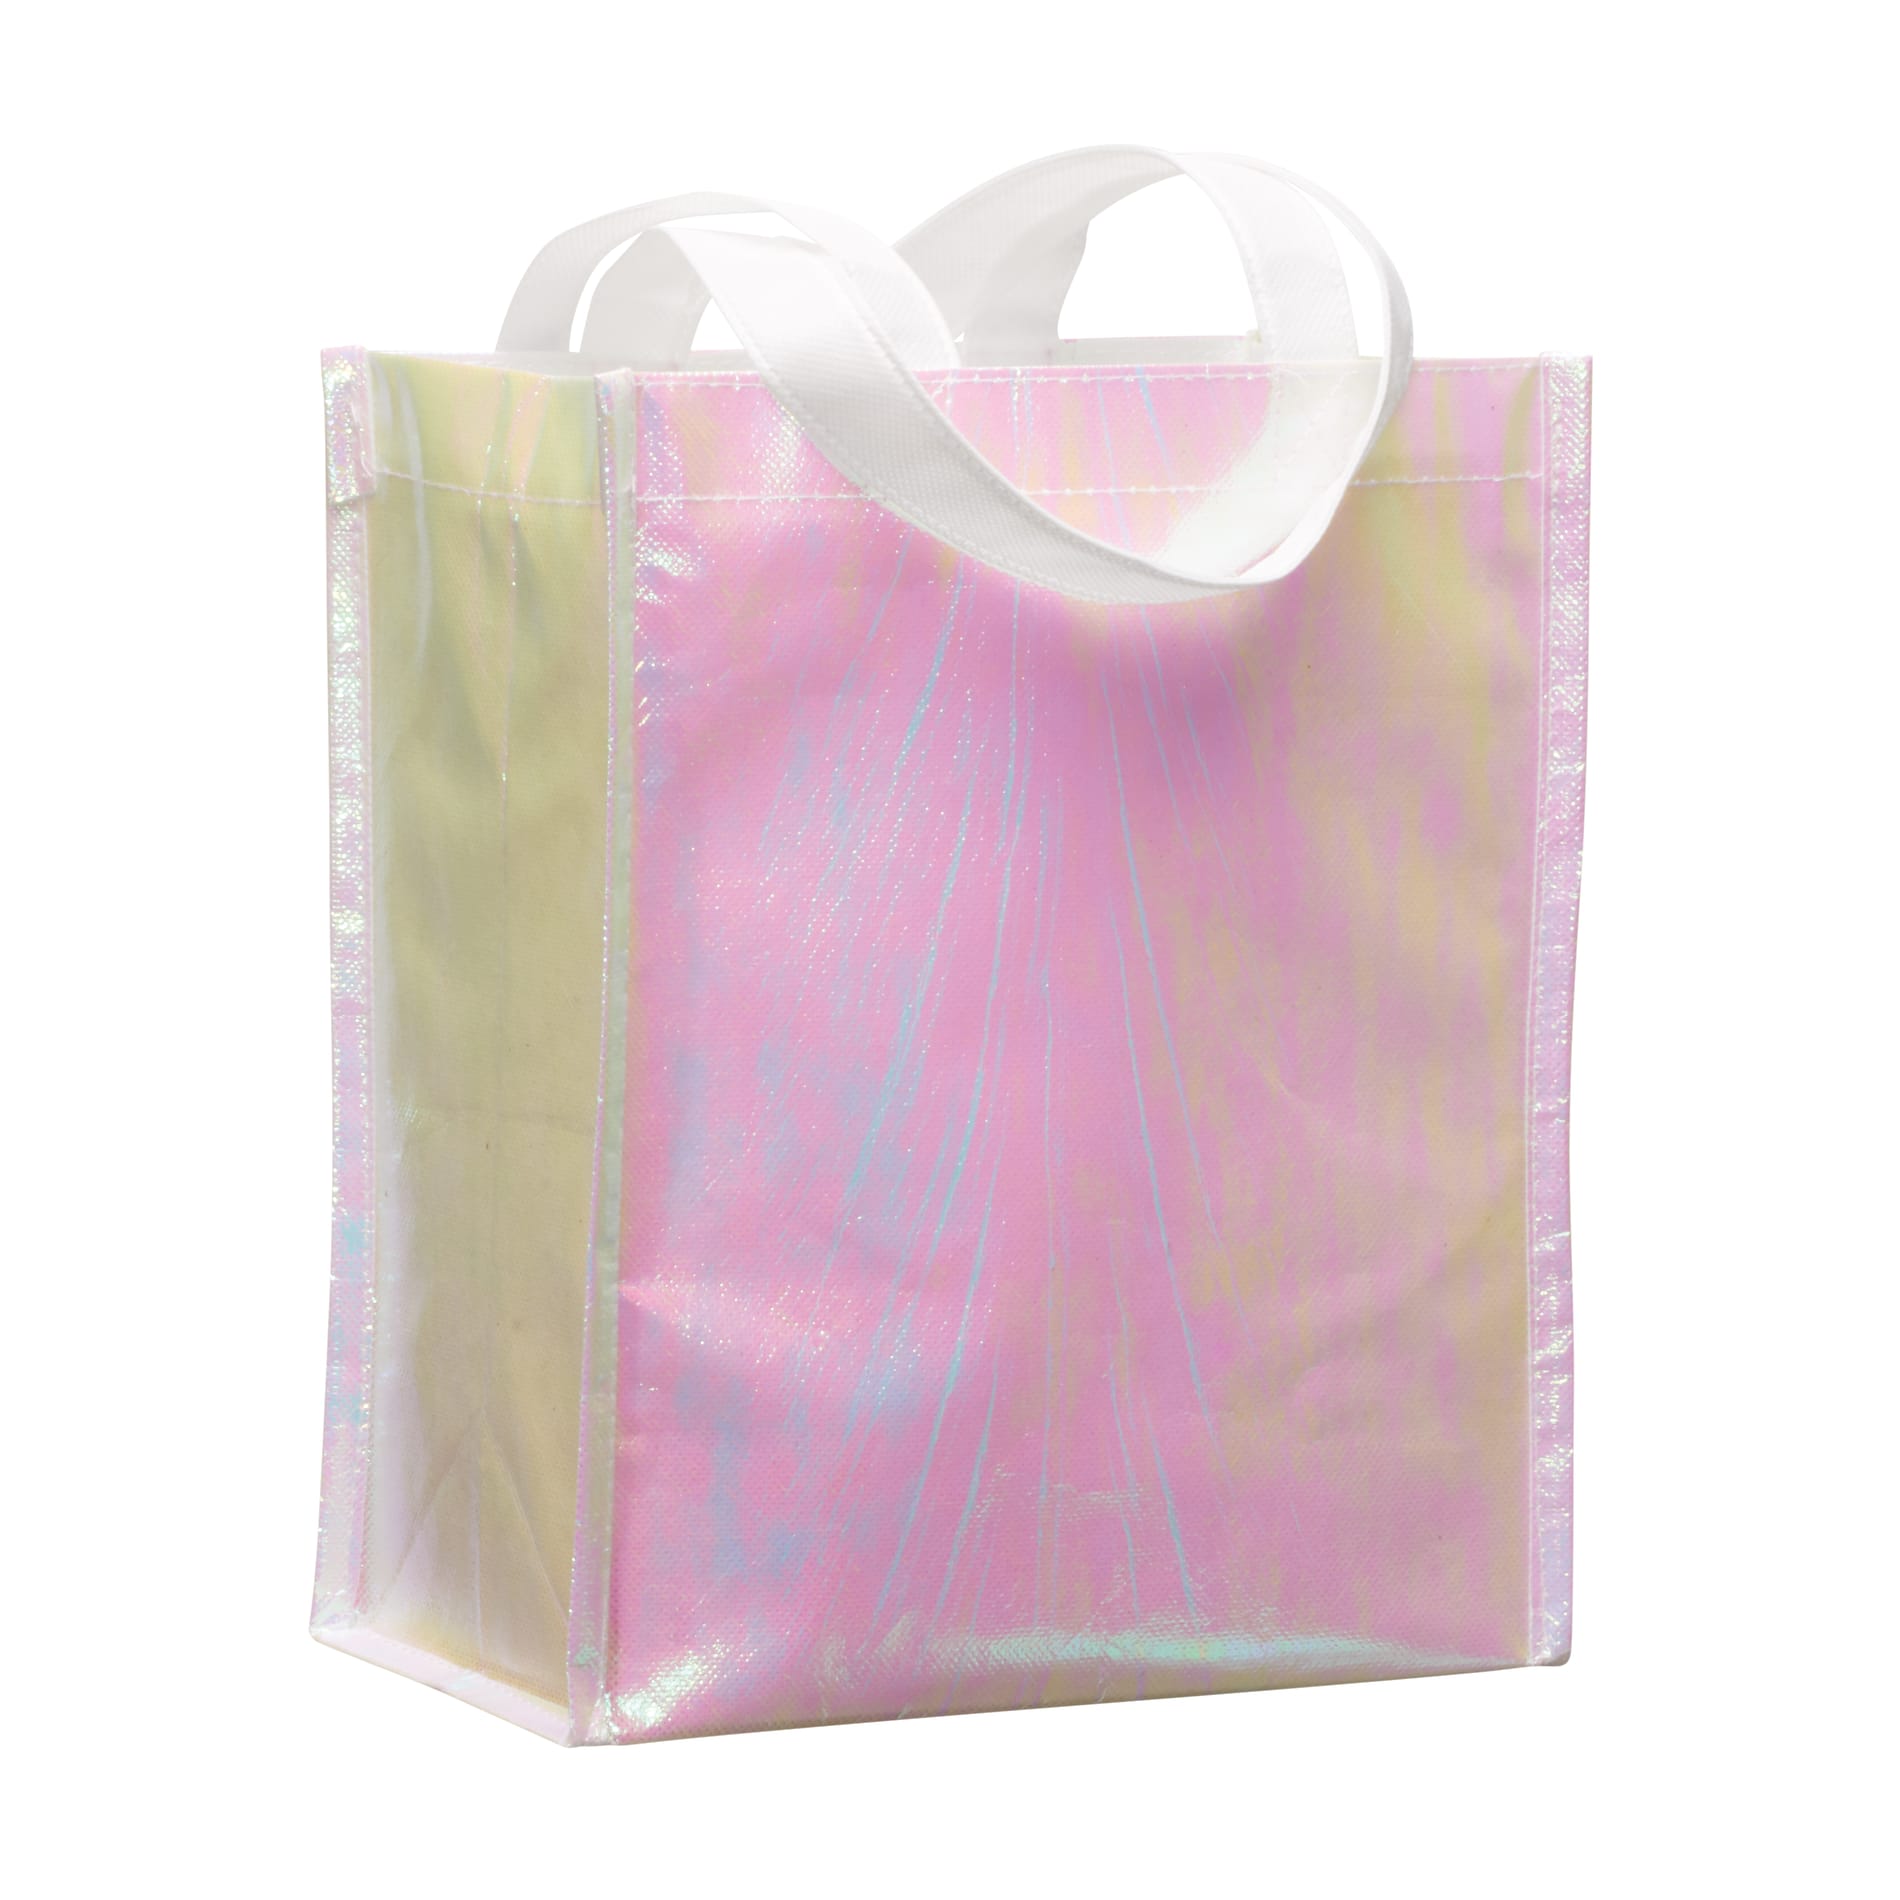 PVC Clear Tote Bag  EverythingBranded USA